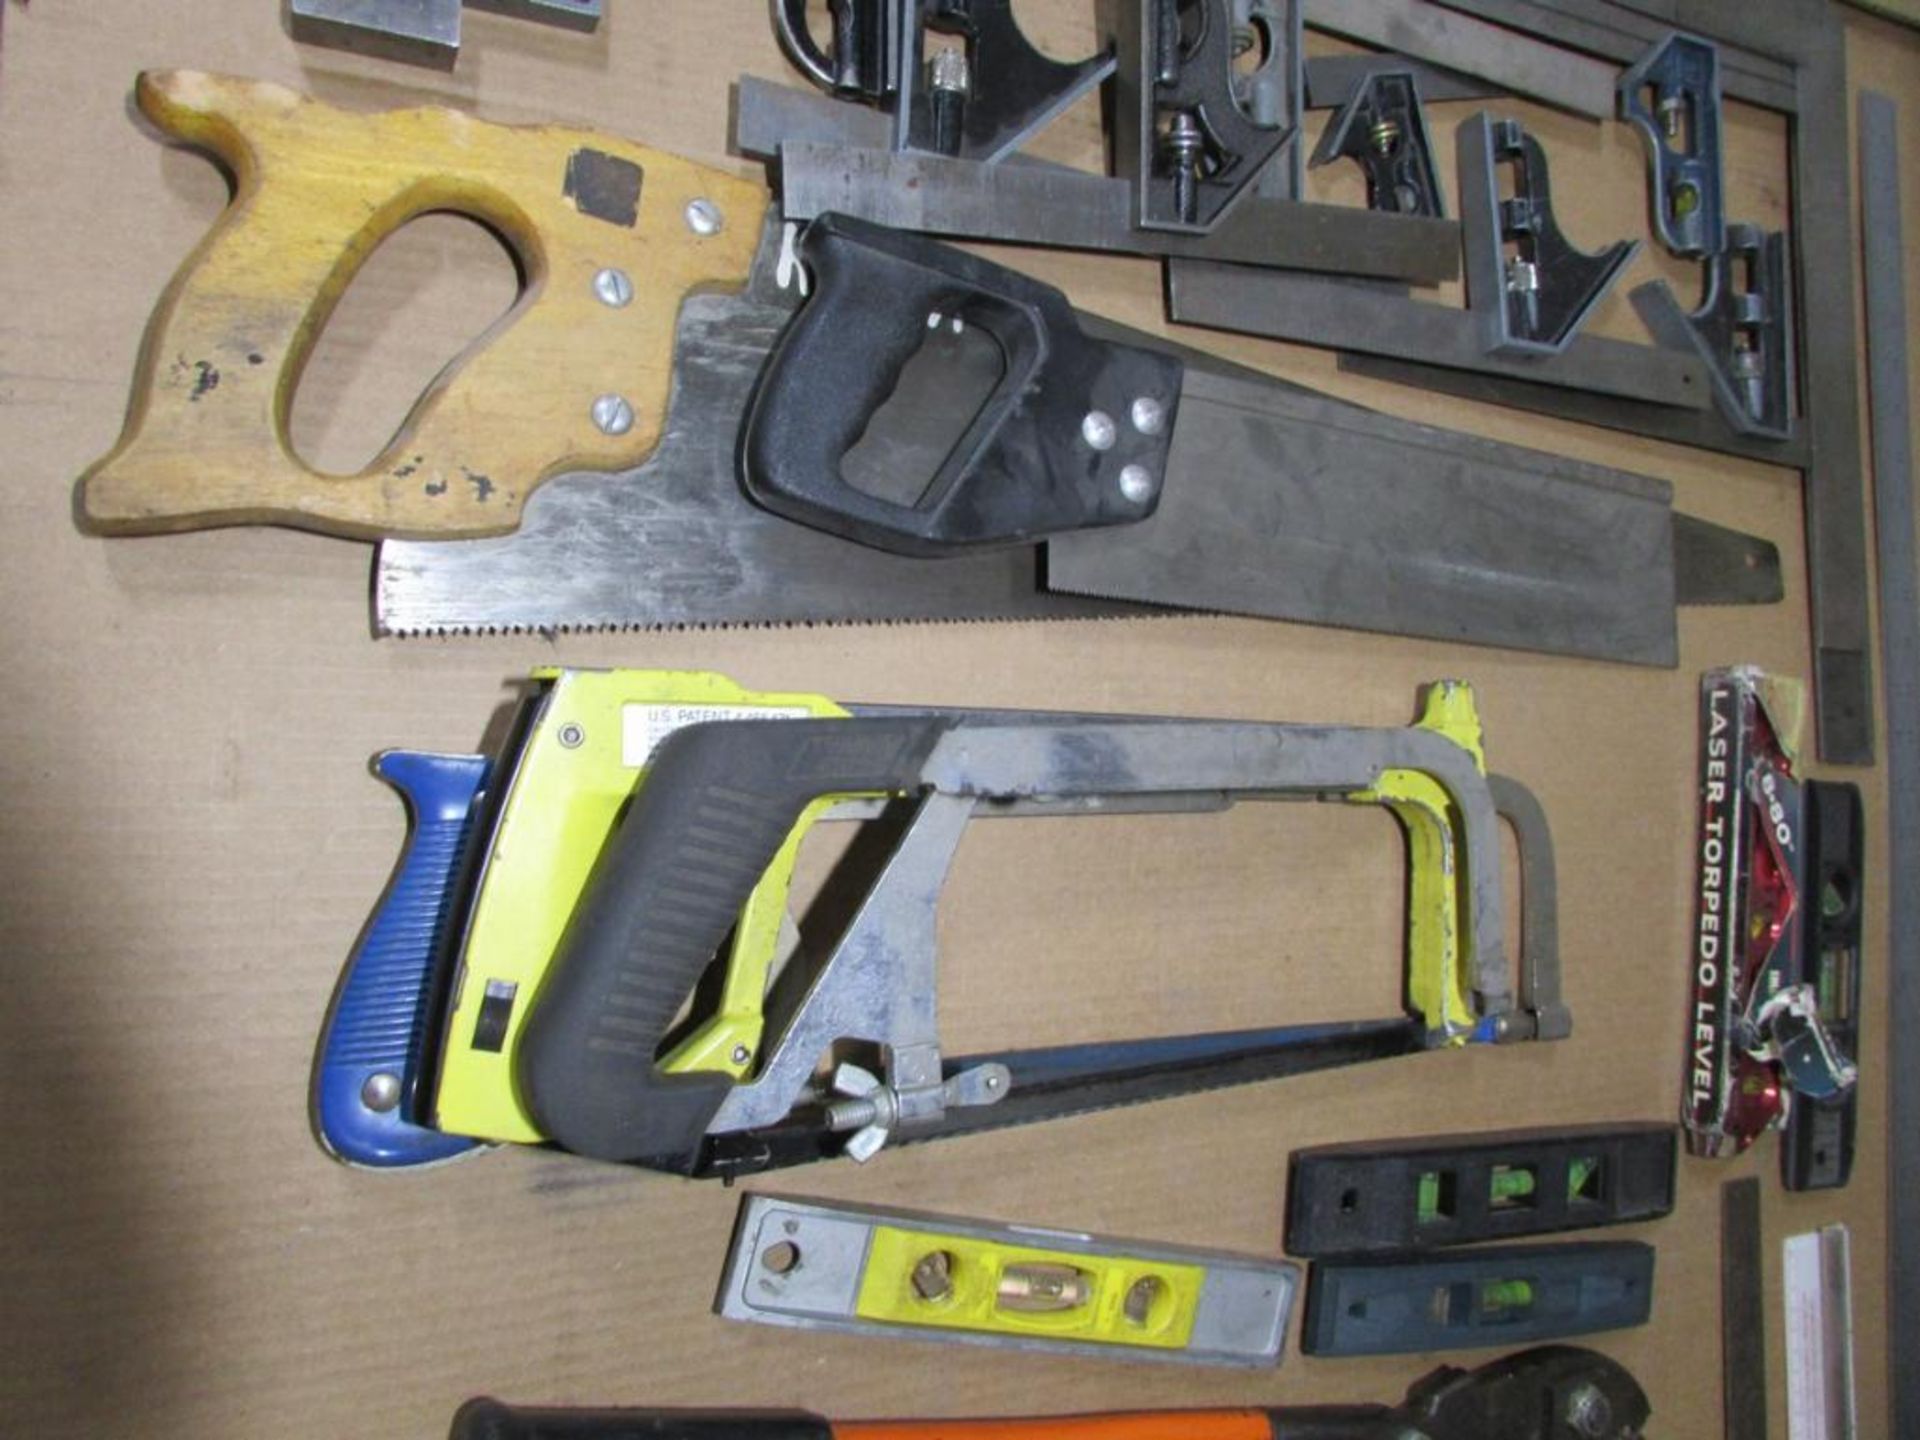 Assorted Hand Tools: Ruler, leveler, Squares, Saws, Compression tool, Adjustable Wrenches, and Pipe - Image 4 of 5